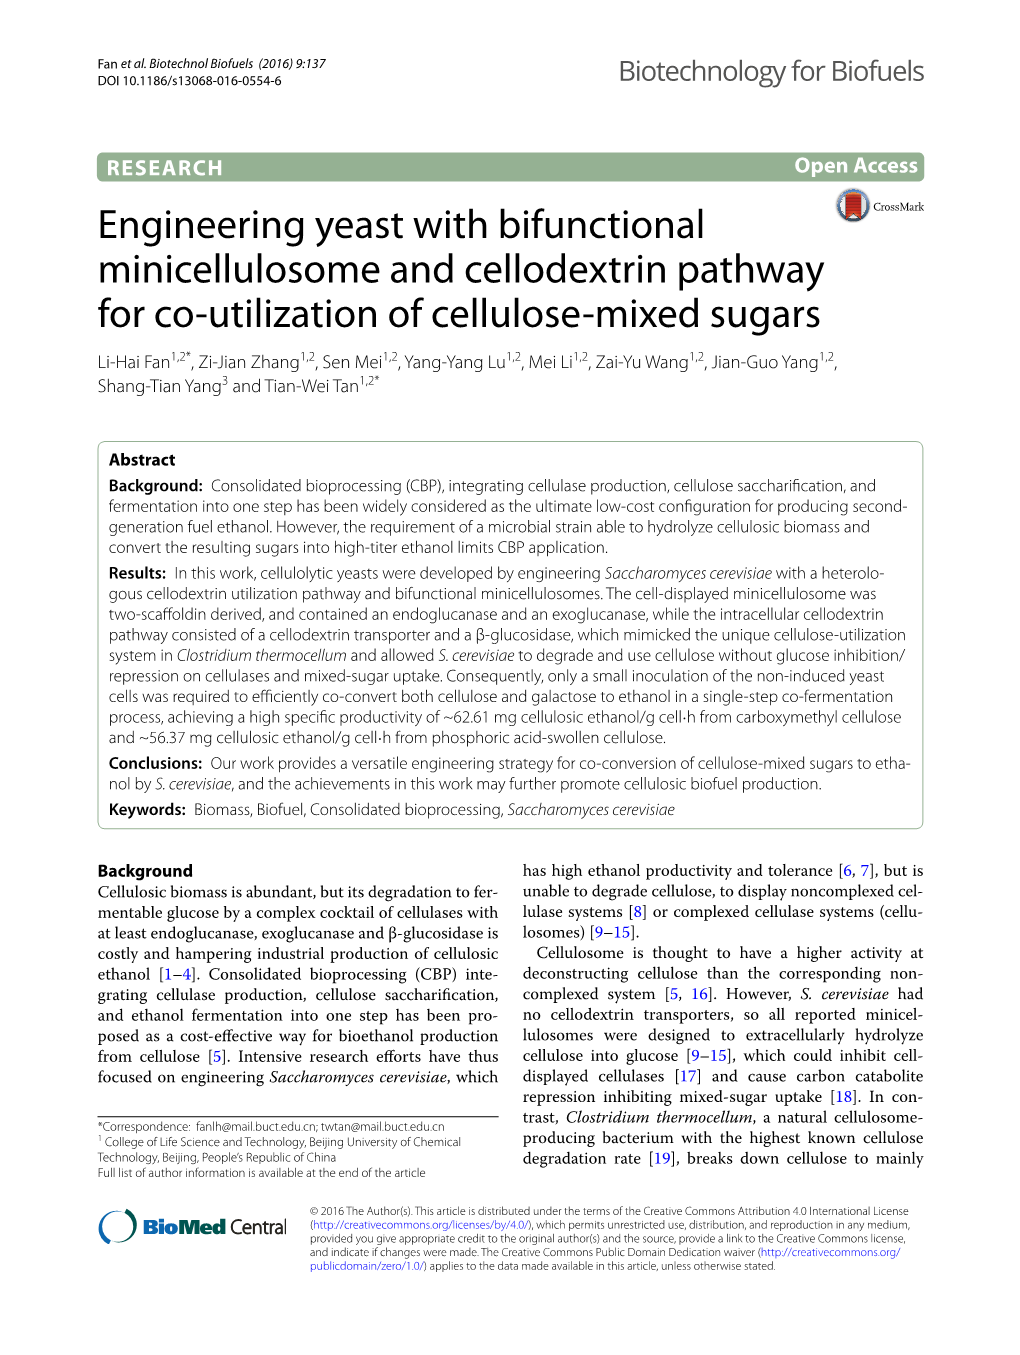 Engineering Yeast with Bifunctional Minicellulosome and Cellodextrin